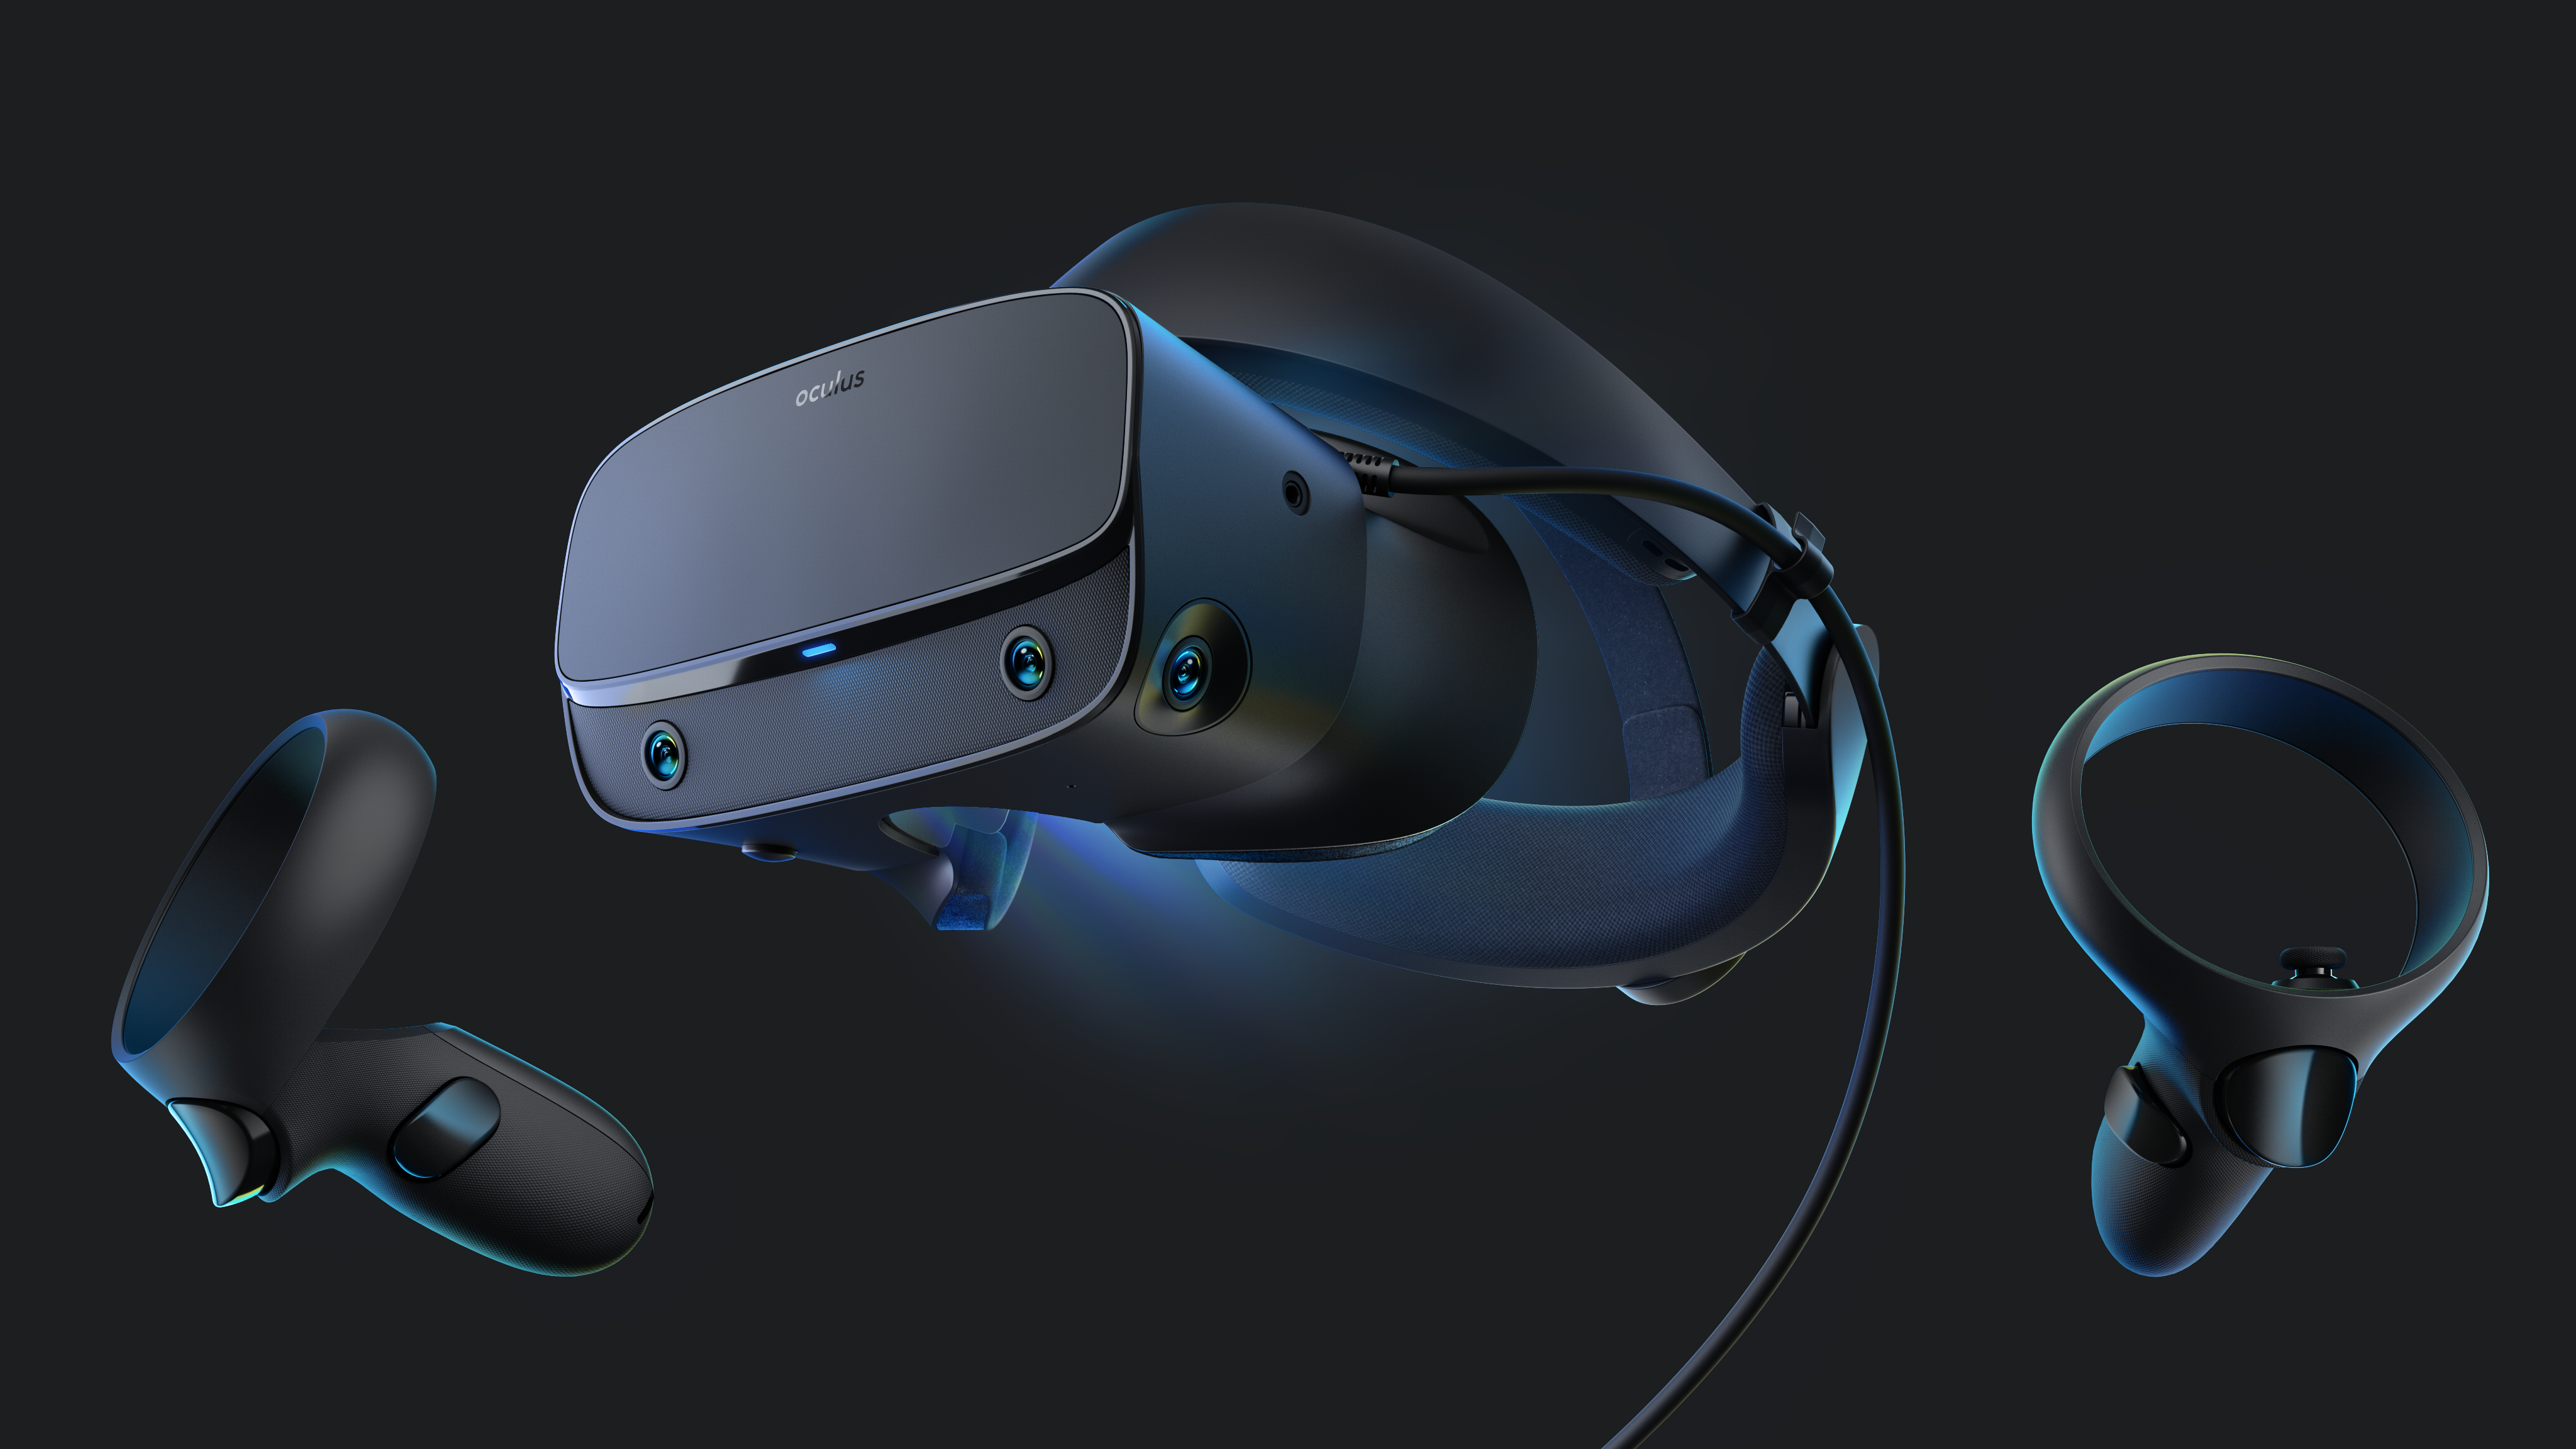 oculus rift s headset and controllers